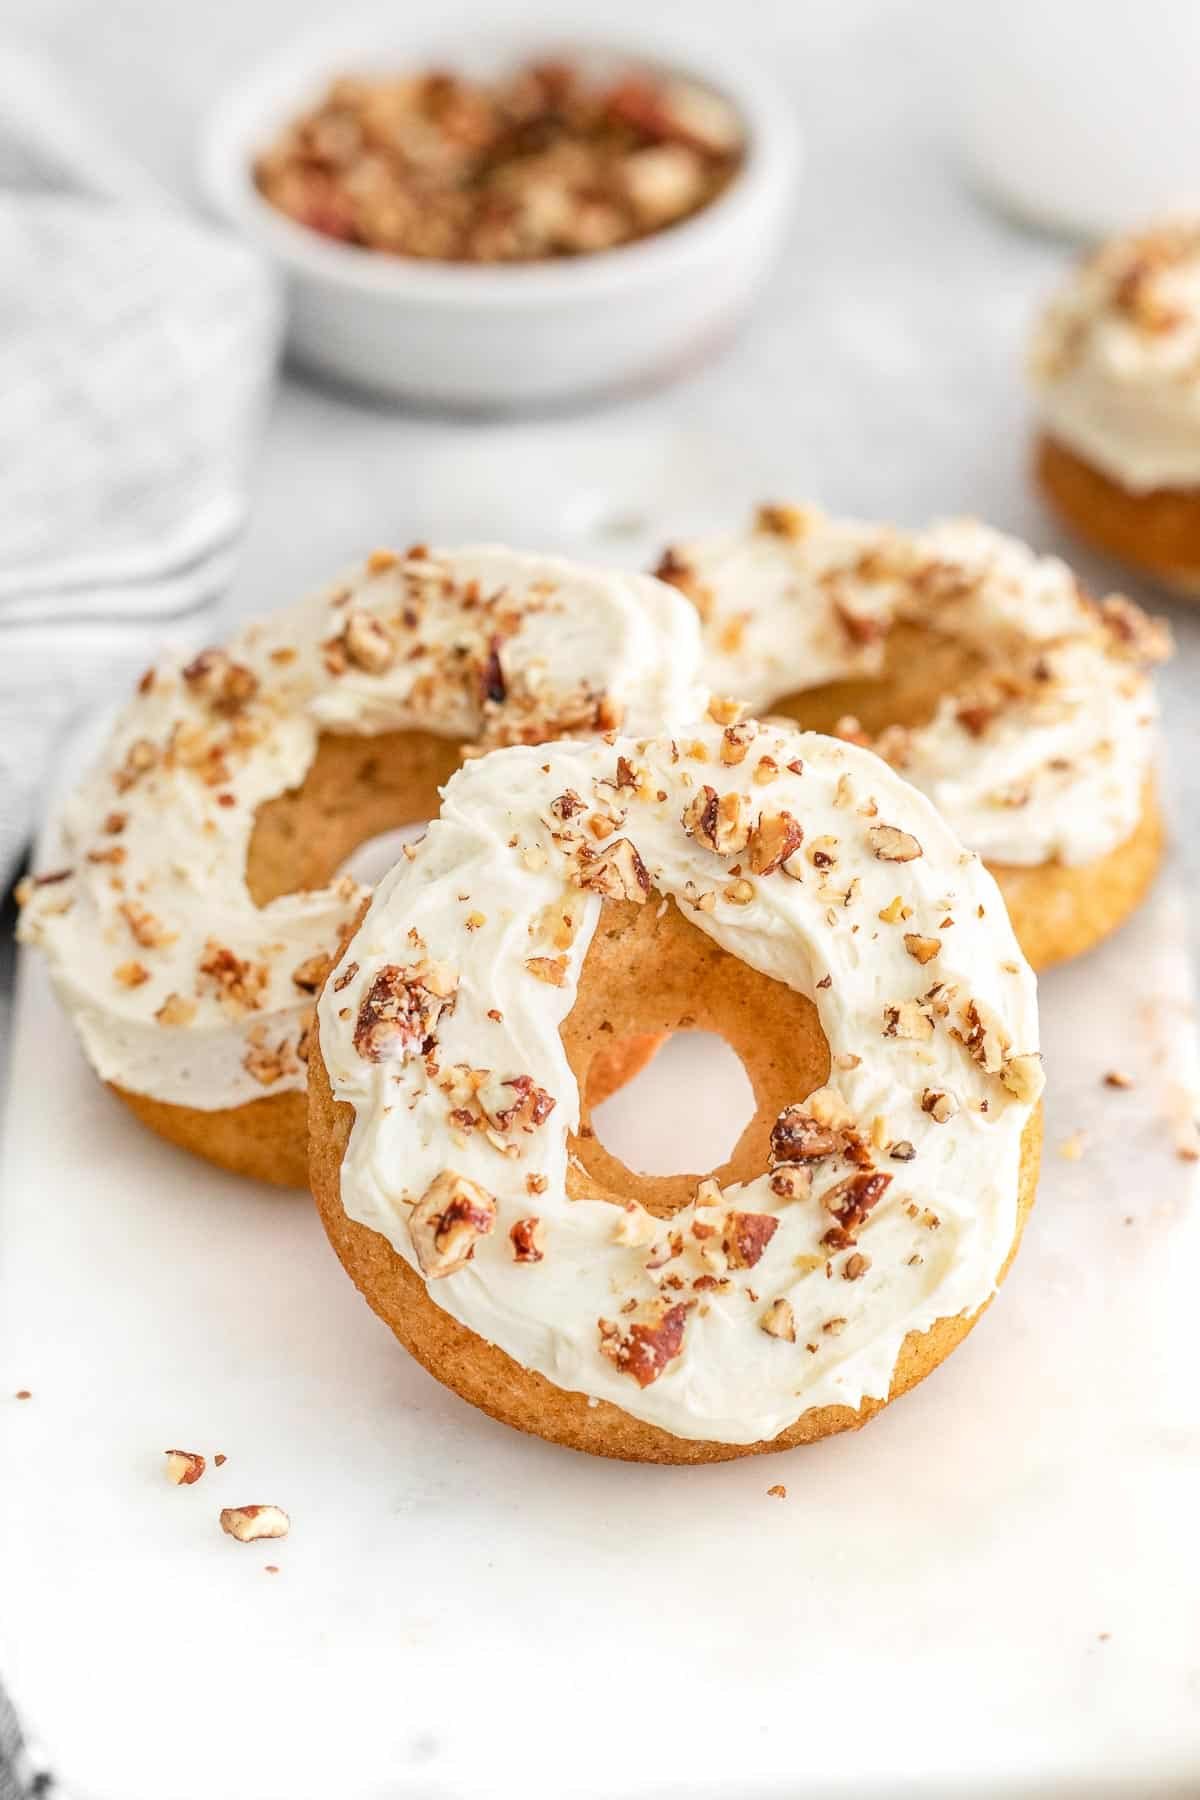 Several maple donuts topped with pecans on a white tray.